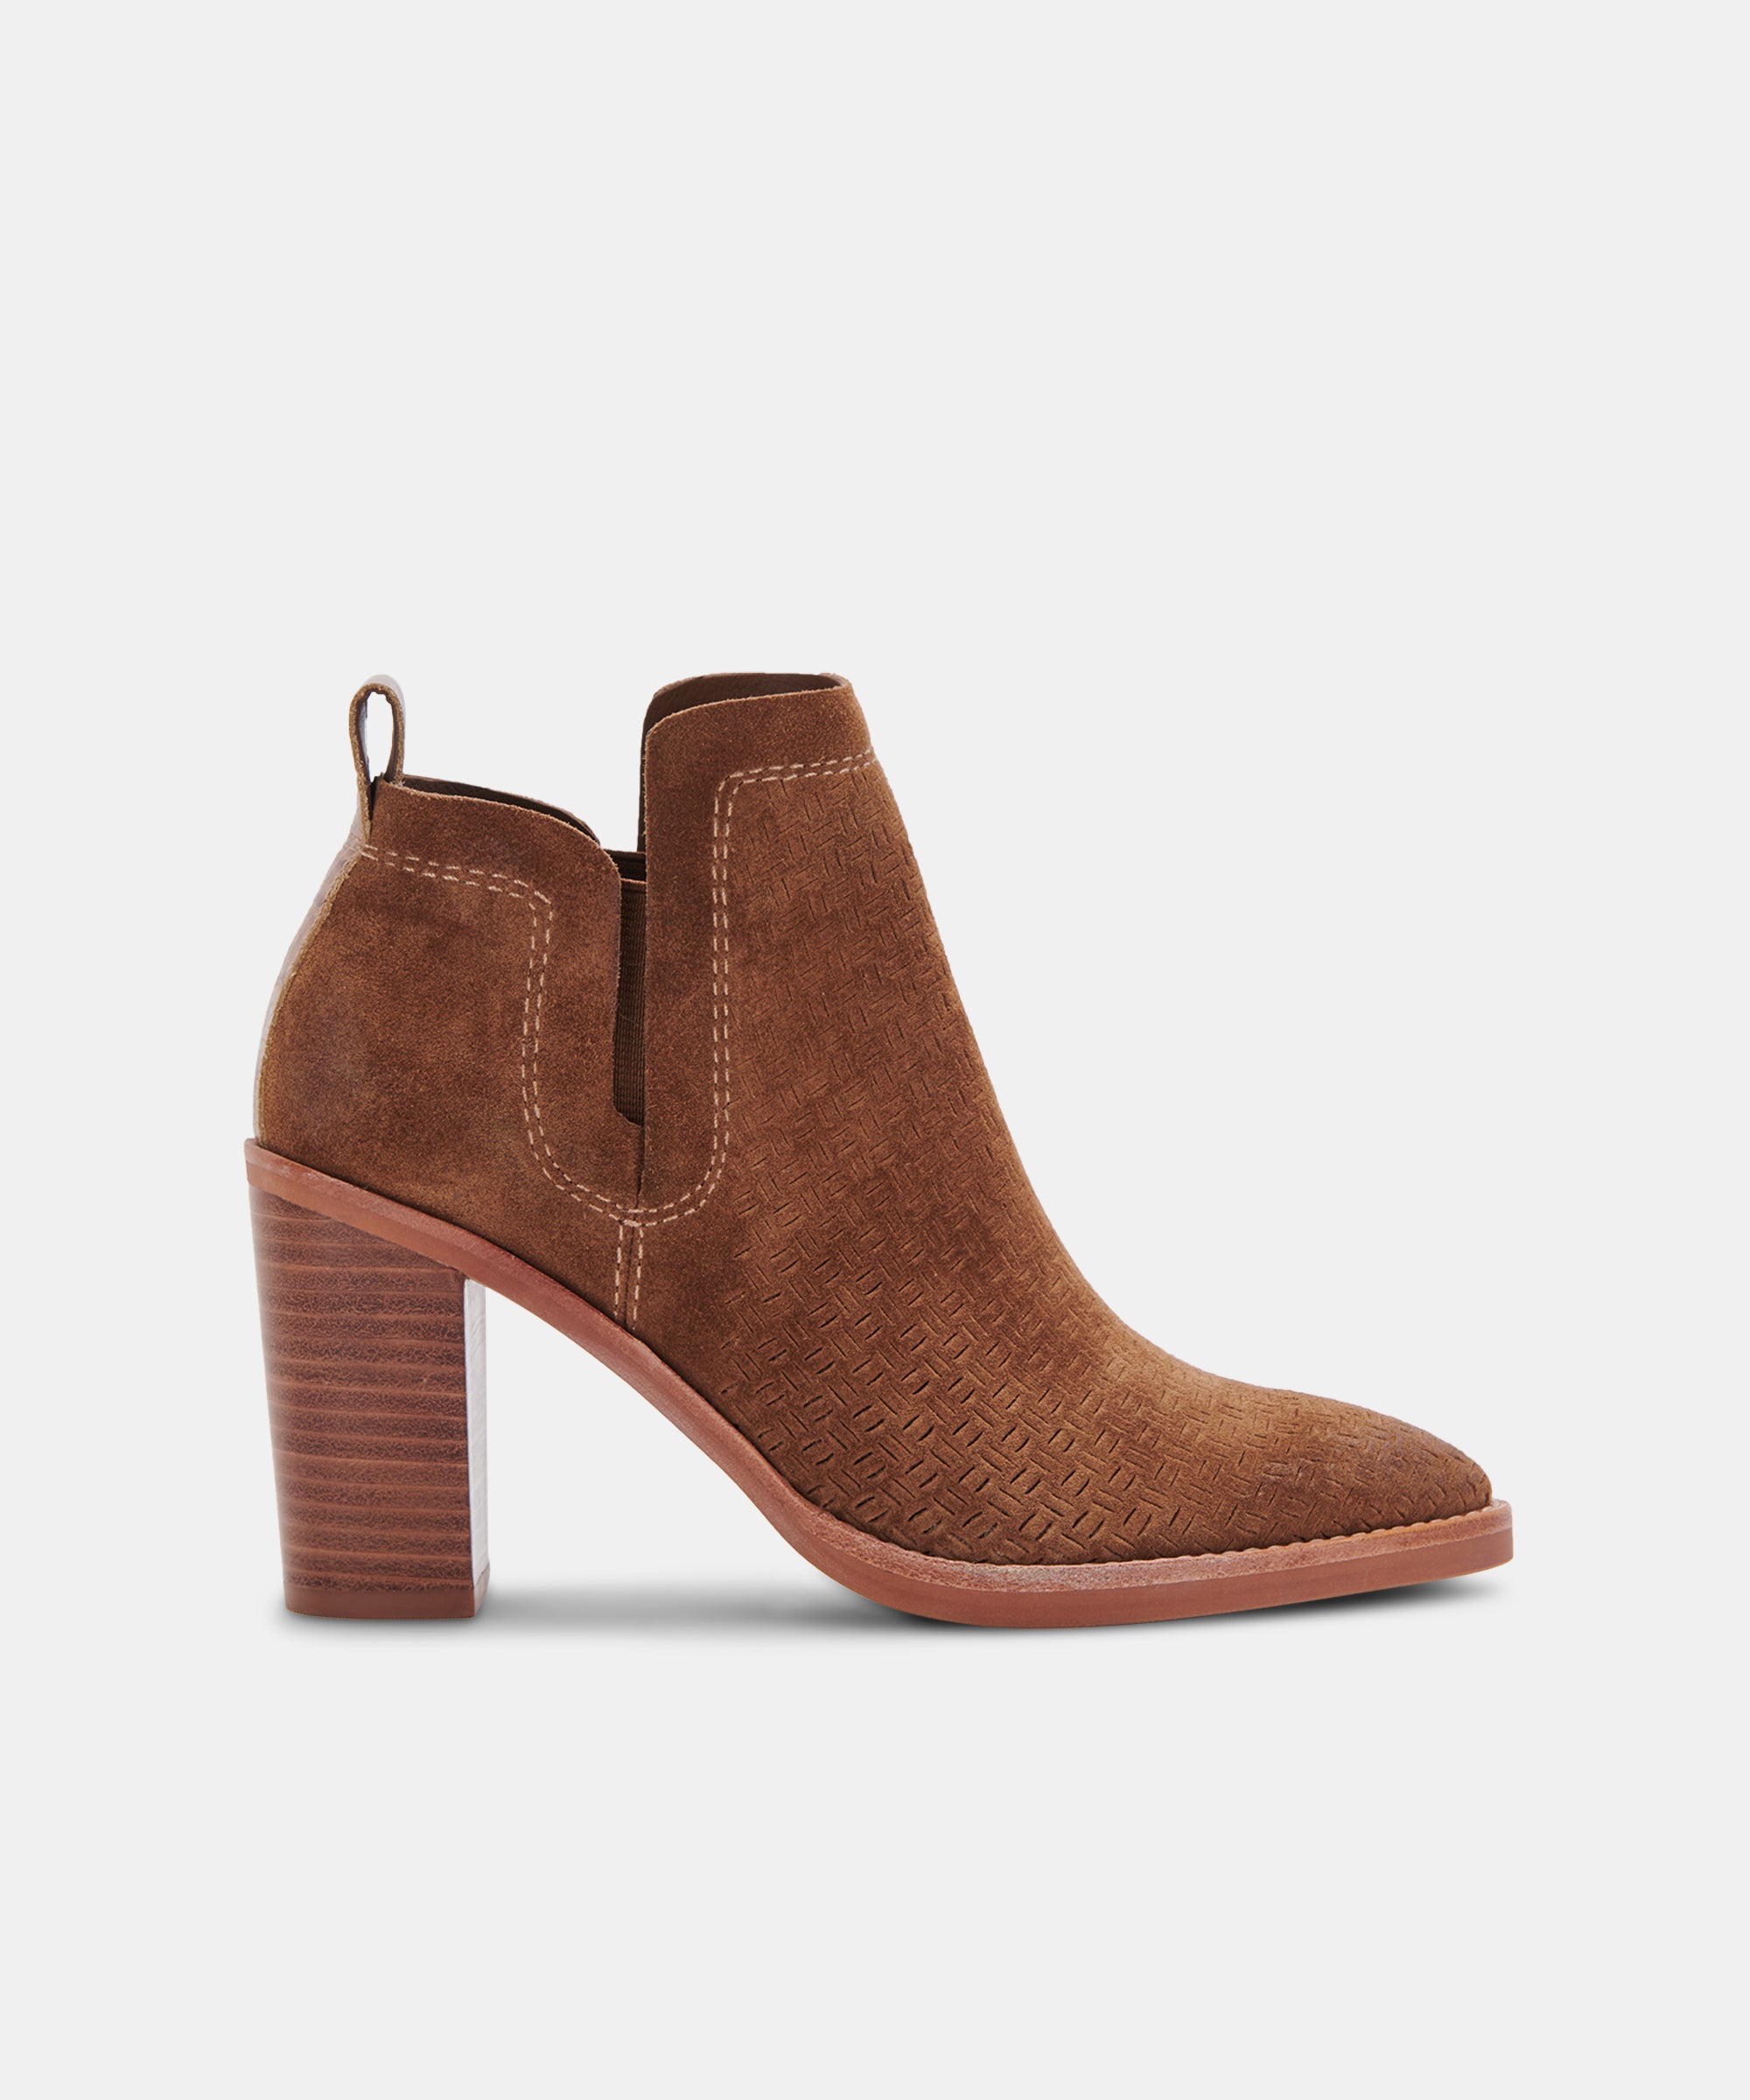 SIRANO BOOTIES DK BROWN SUEDE